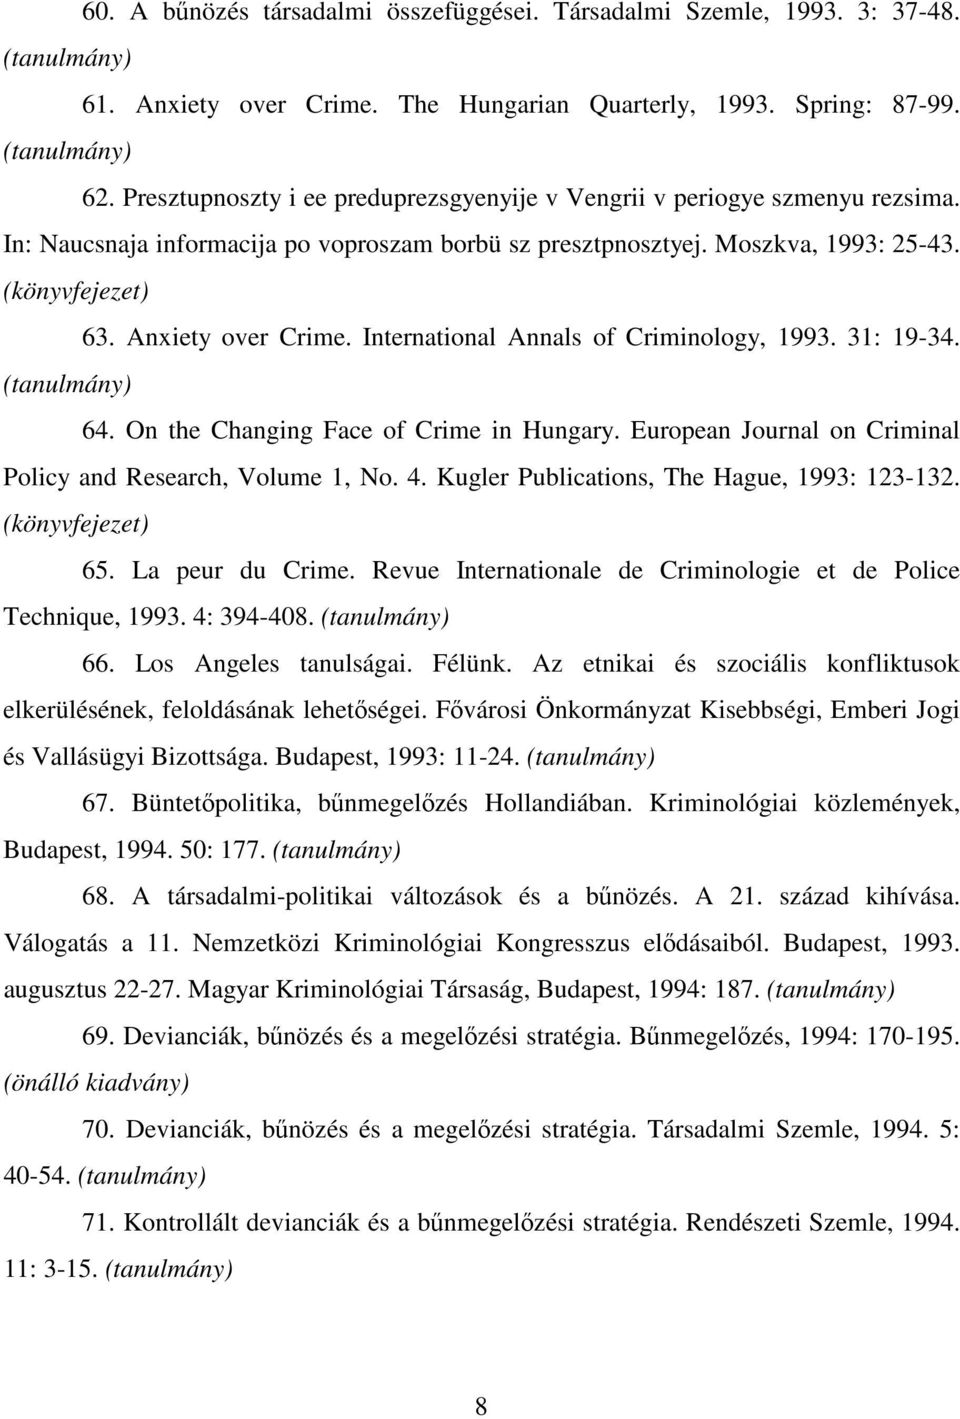 International Annals of Criminology, 1993. 31: 19-34. 64. On the Changing Face of Crime in Hungary. European Journal on Criminal Policy and Research, Volume 1, No. 4.